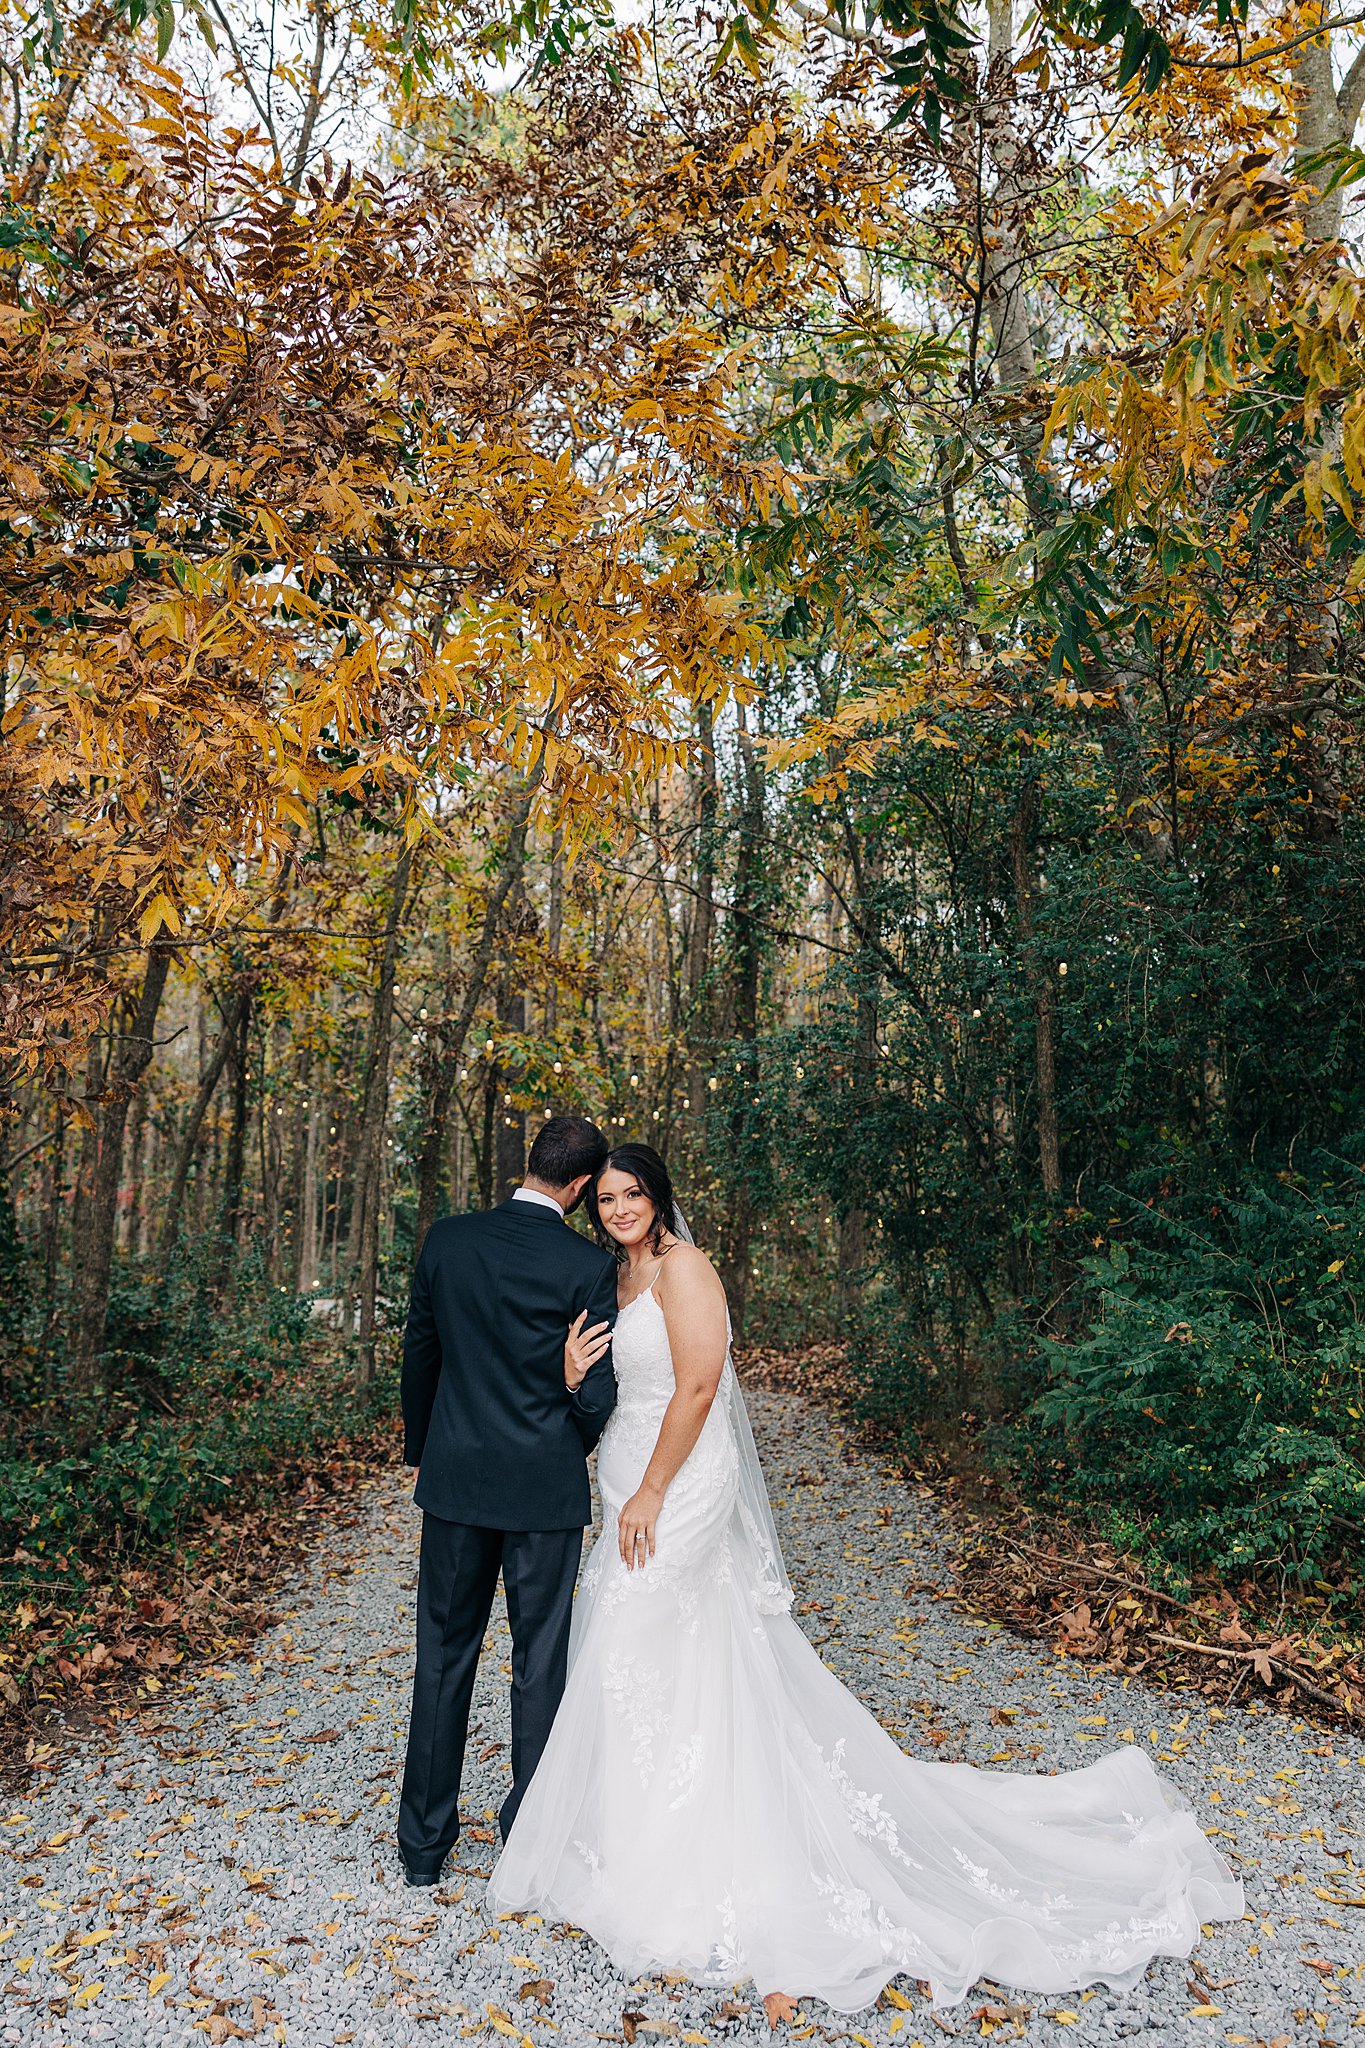 A bride hangs on the arm of her groom in a fall colored forest trail at their cornealius properties wedding